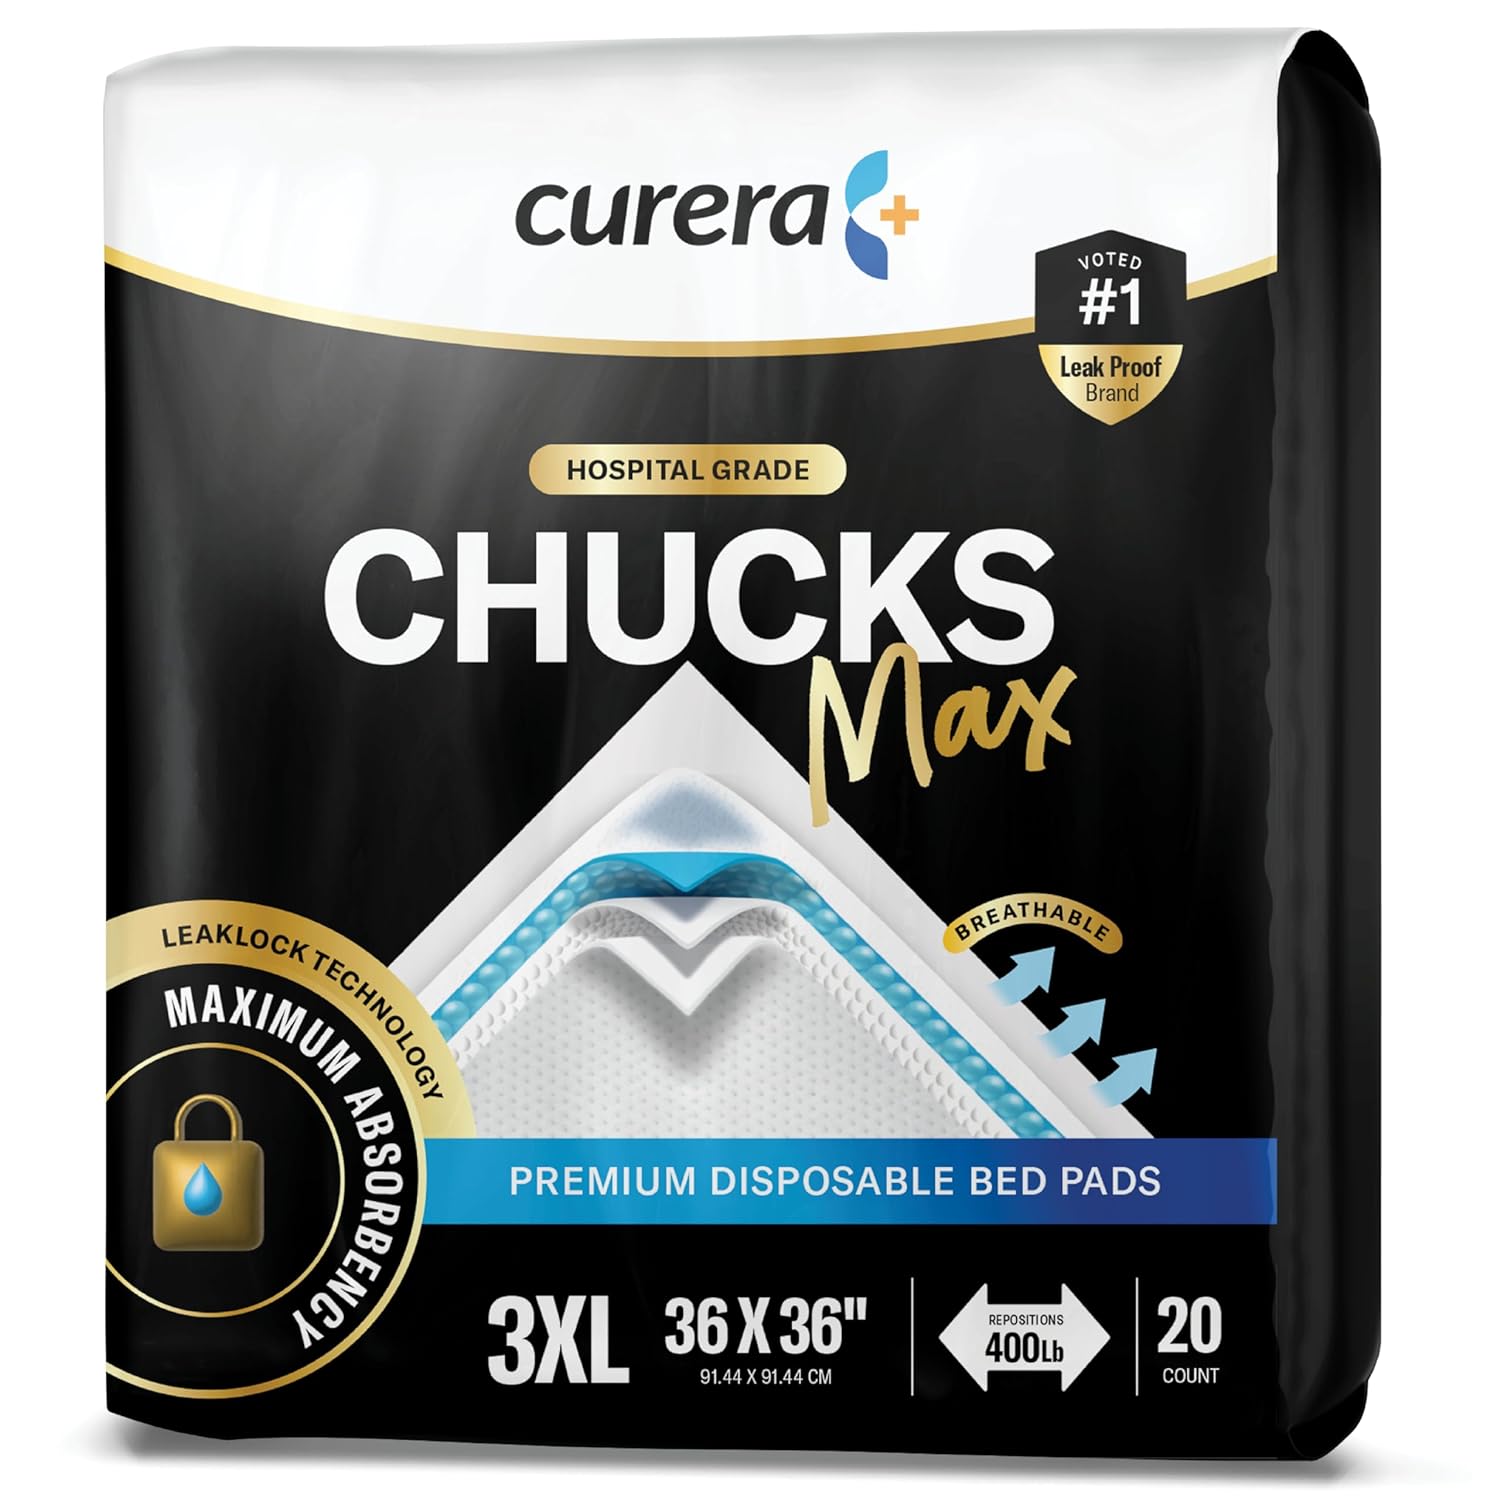 Save 10% on Chucks MAX Hospital Grade Bed Pads - Limited Time Offer